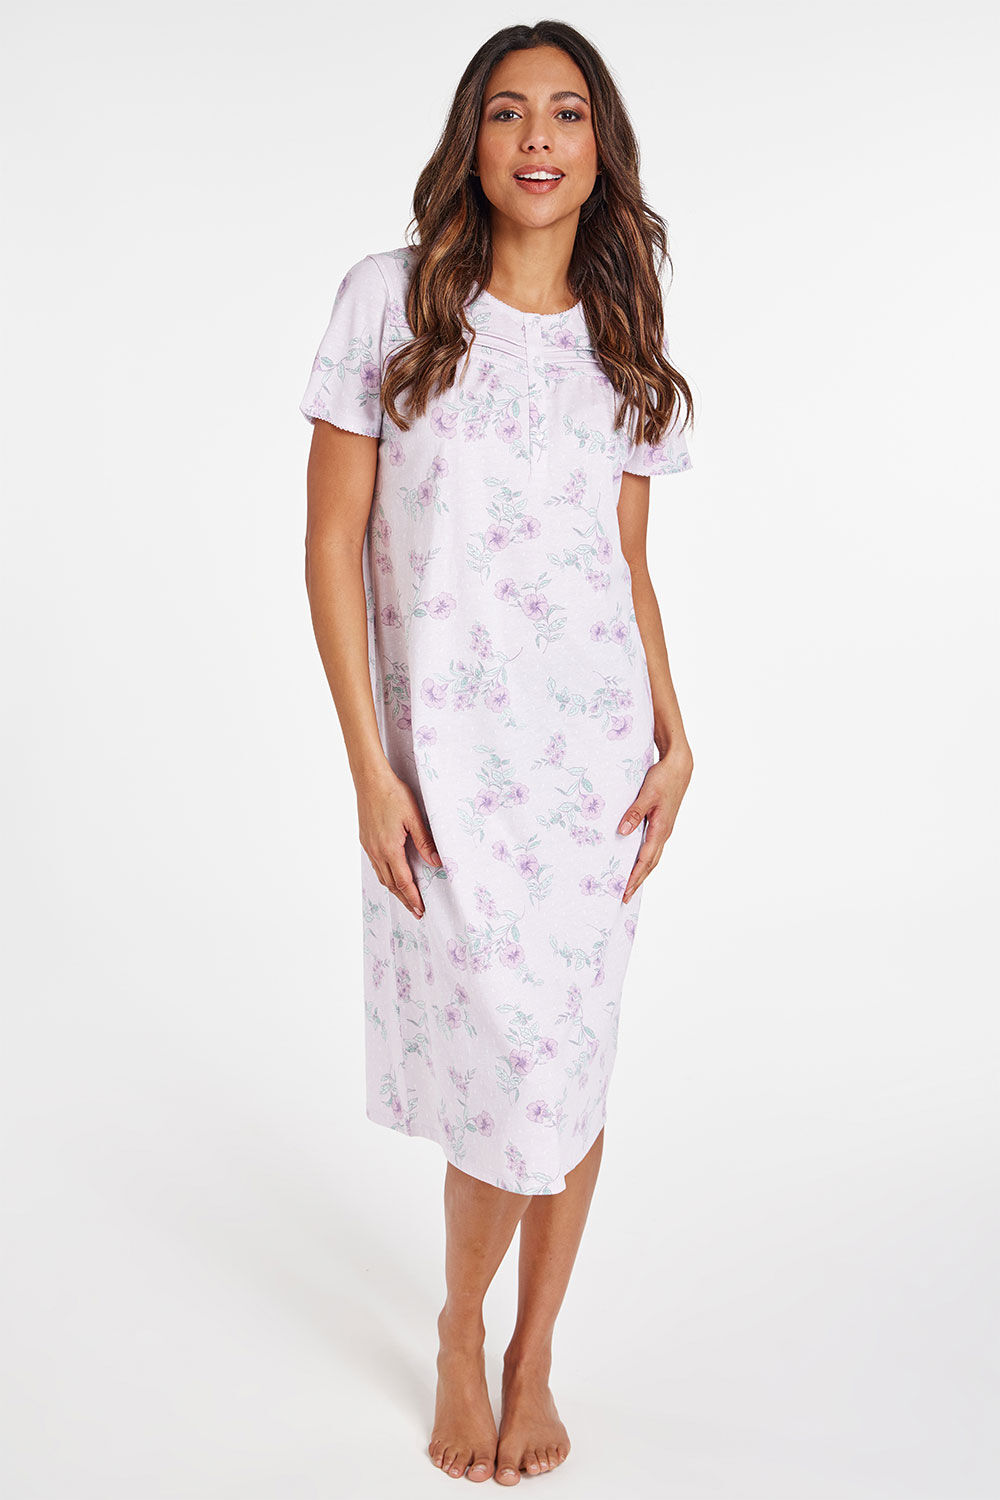 Bonmarche Lilac Short Sleeve Floral and Spot Print Nightdress, Size: 16-18